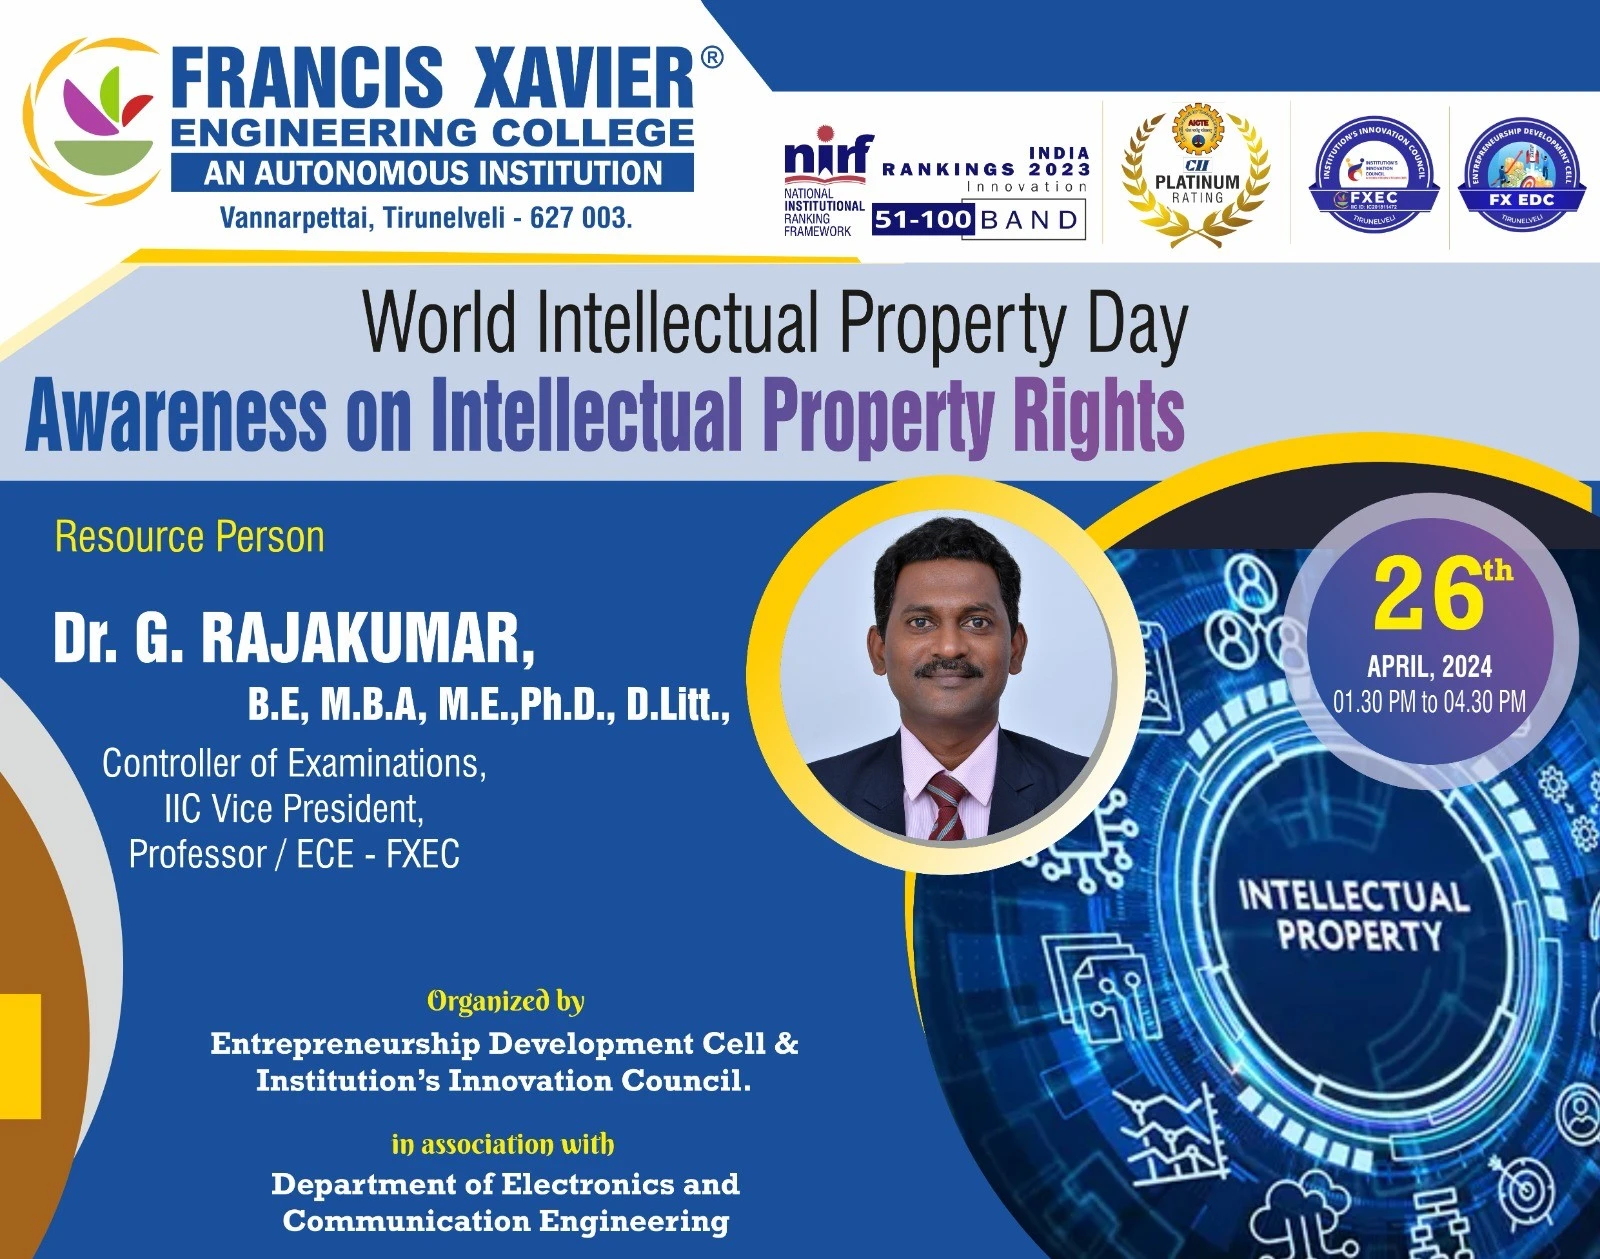 Awareness on Intellectual Property Rights